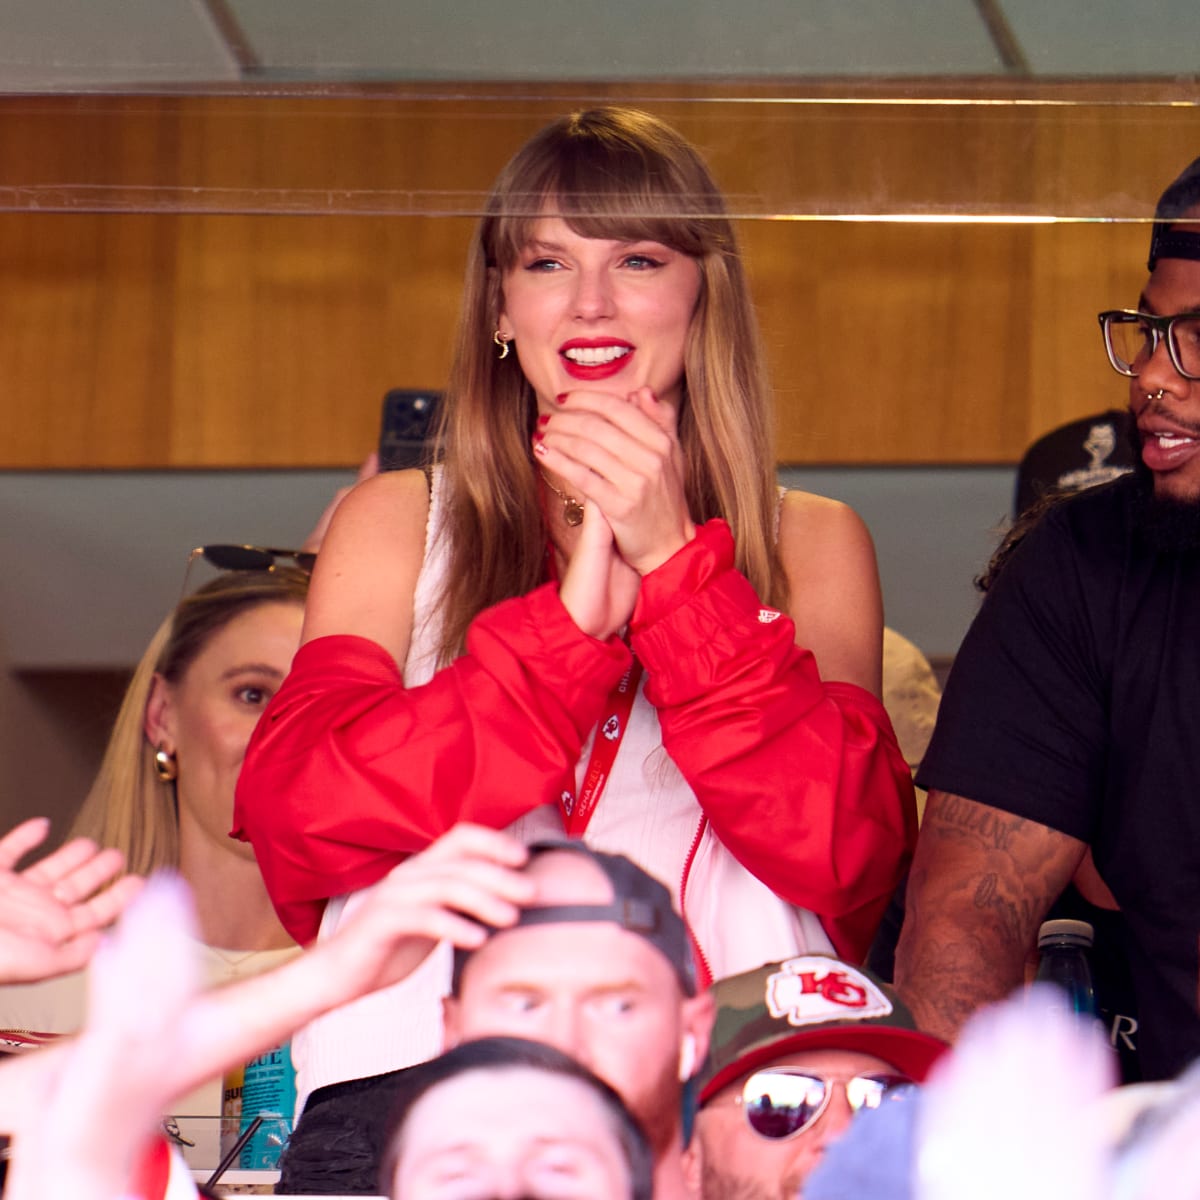 Photo Of Travis Kelce Driving Away With Taylor Swift Is Going Viral - The  Spun: What's Trending In The Sports World Today